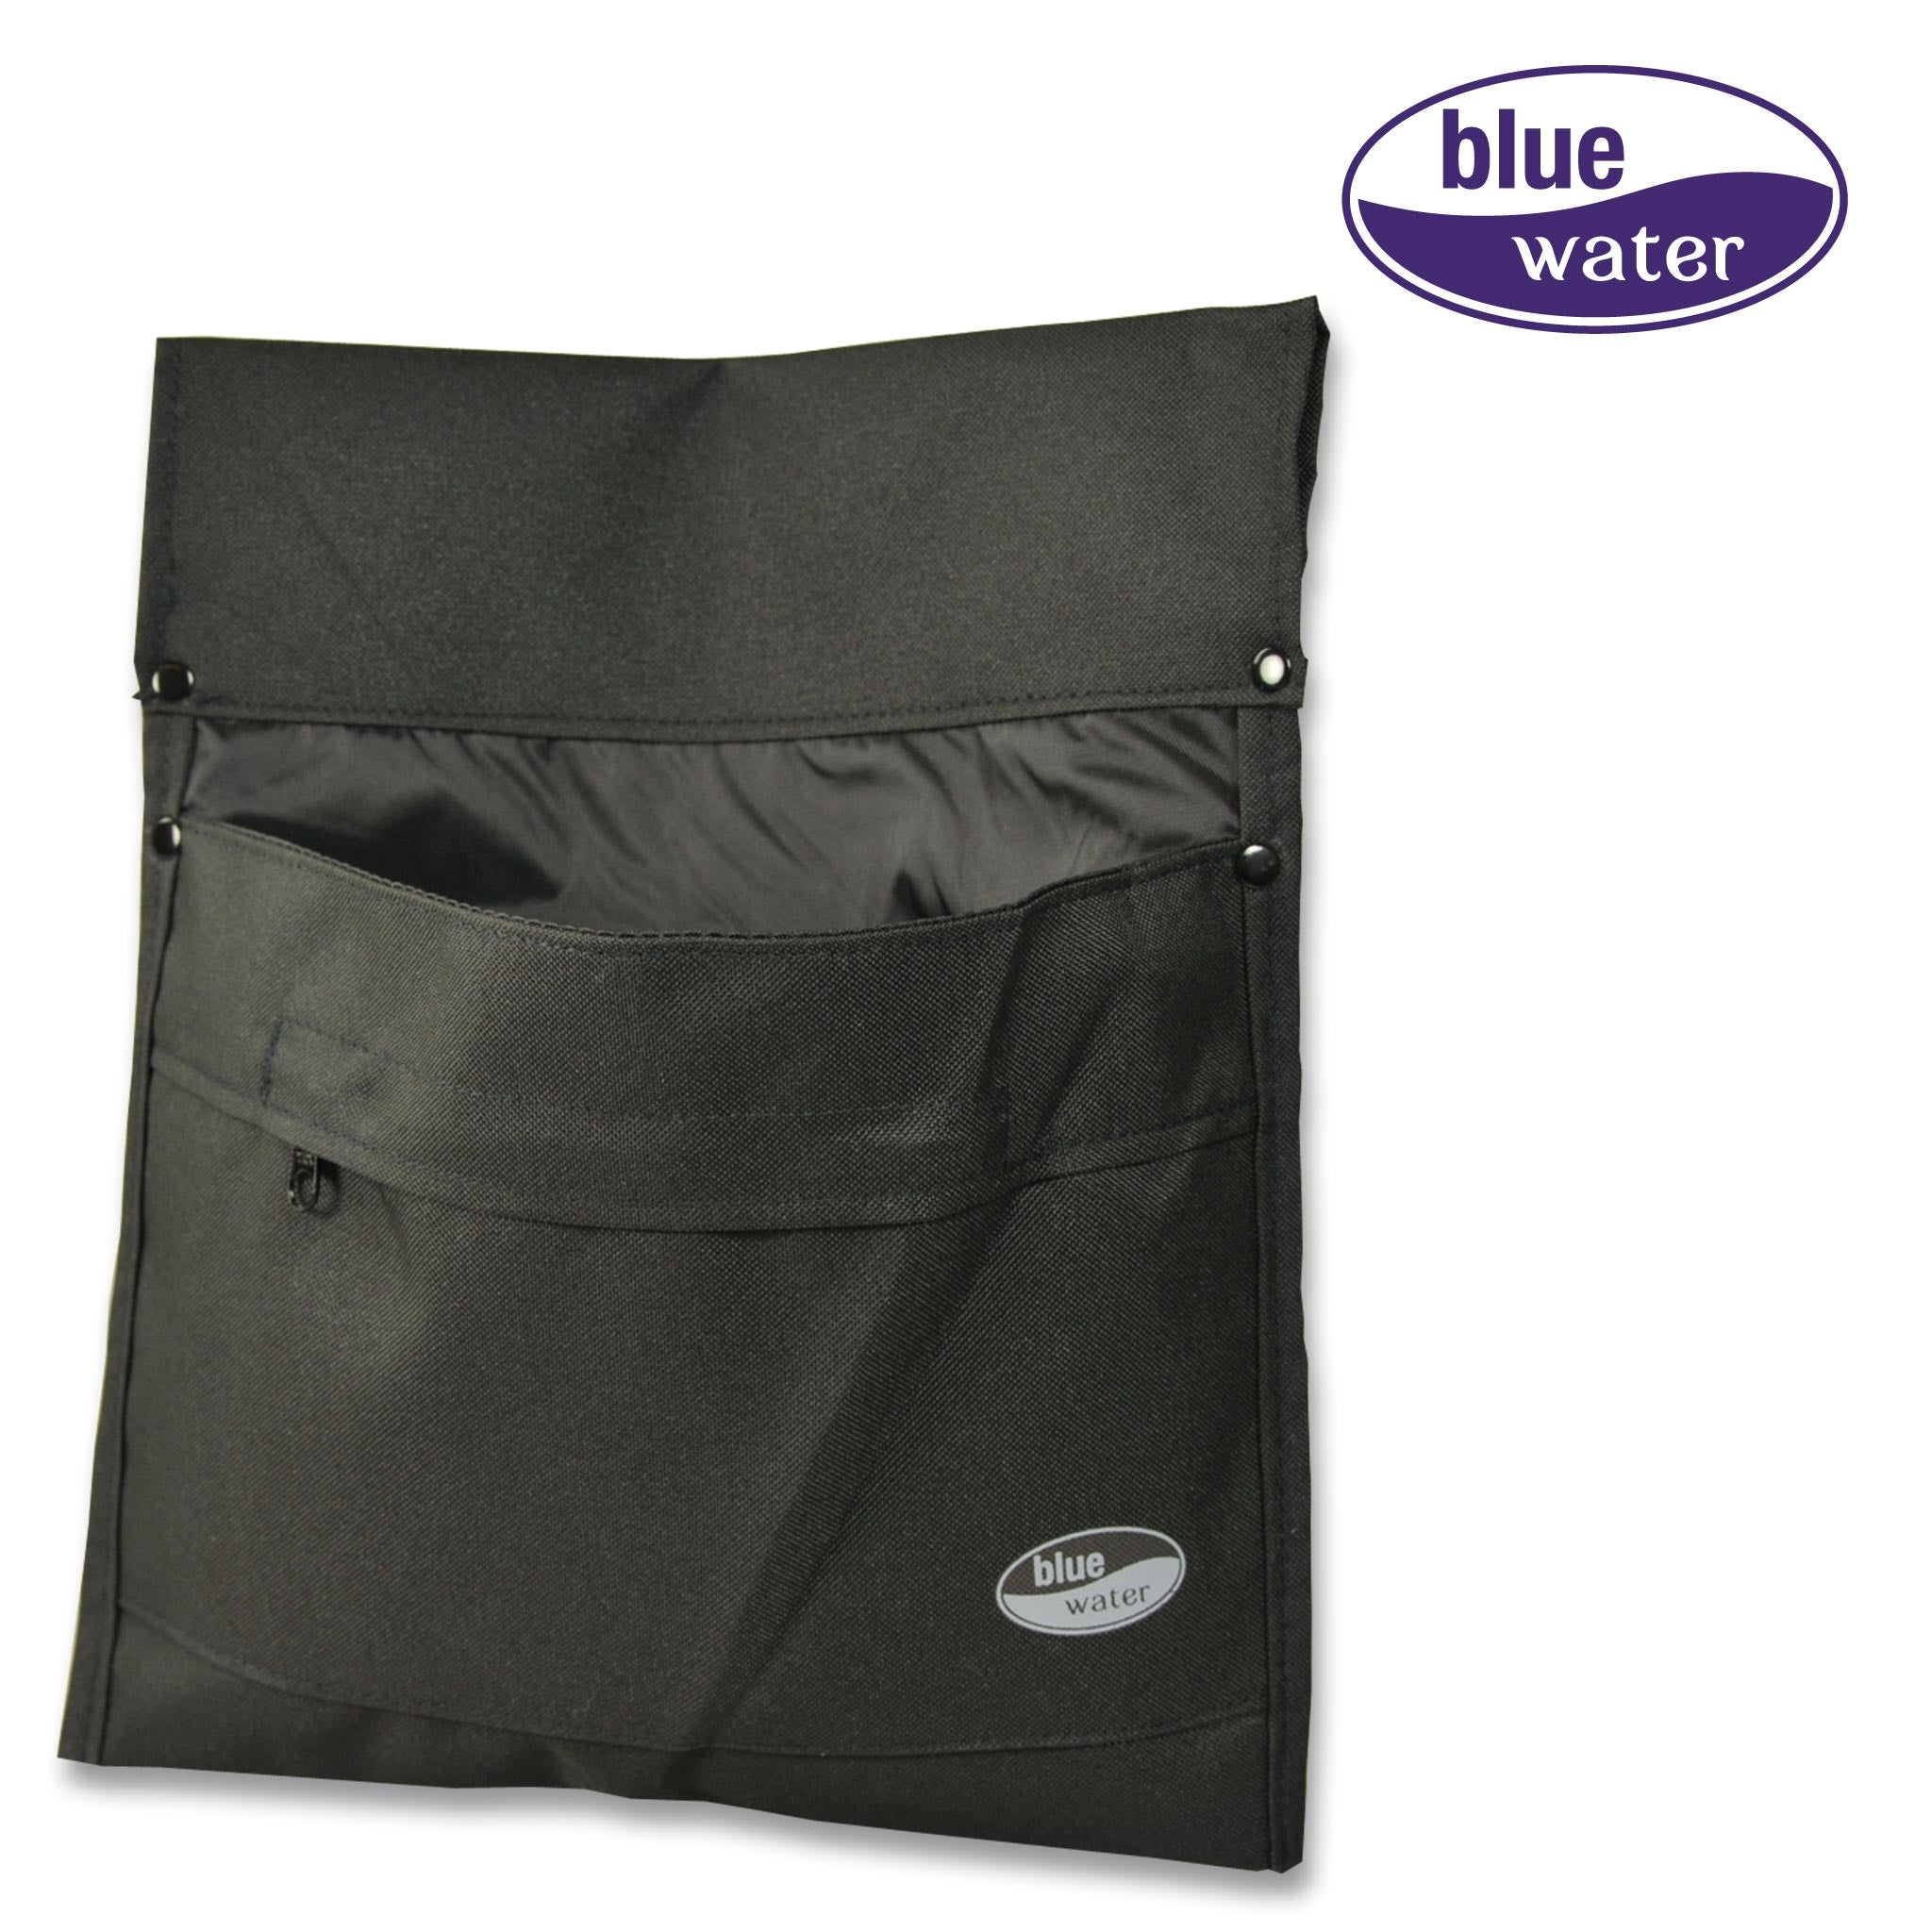 Bluewater Single Pouch - Nylon